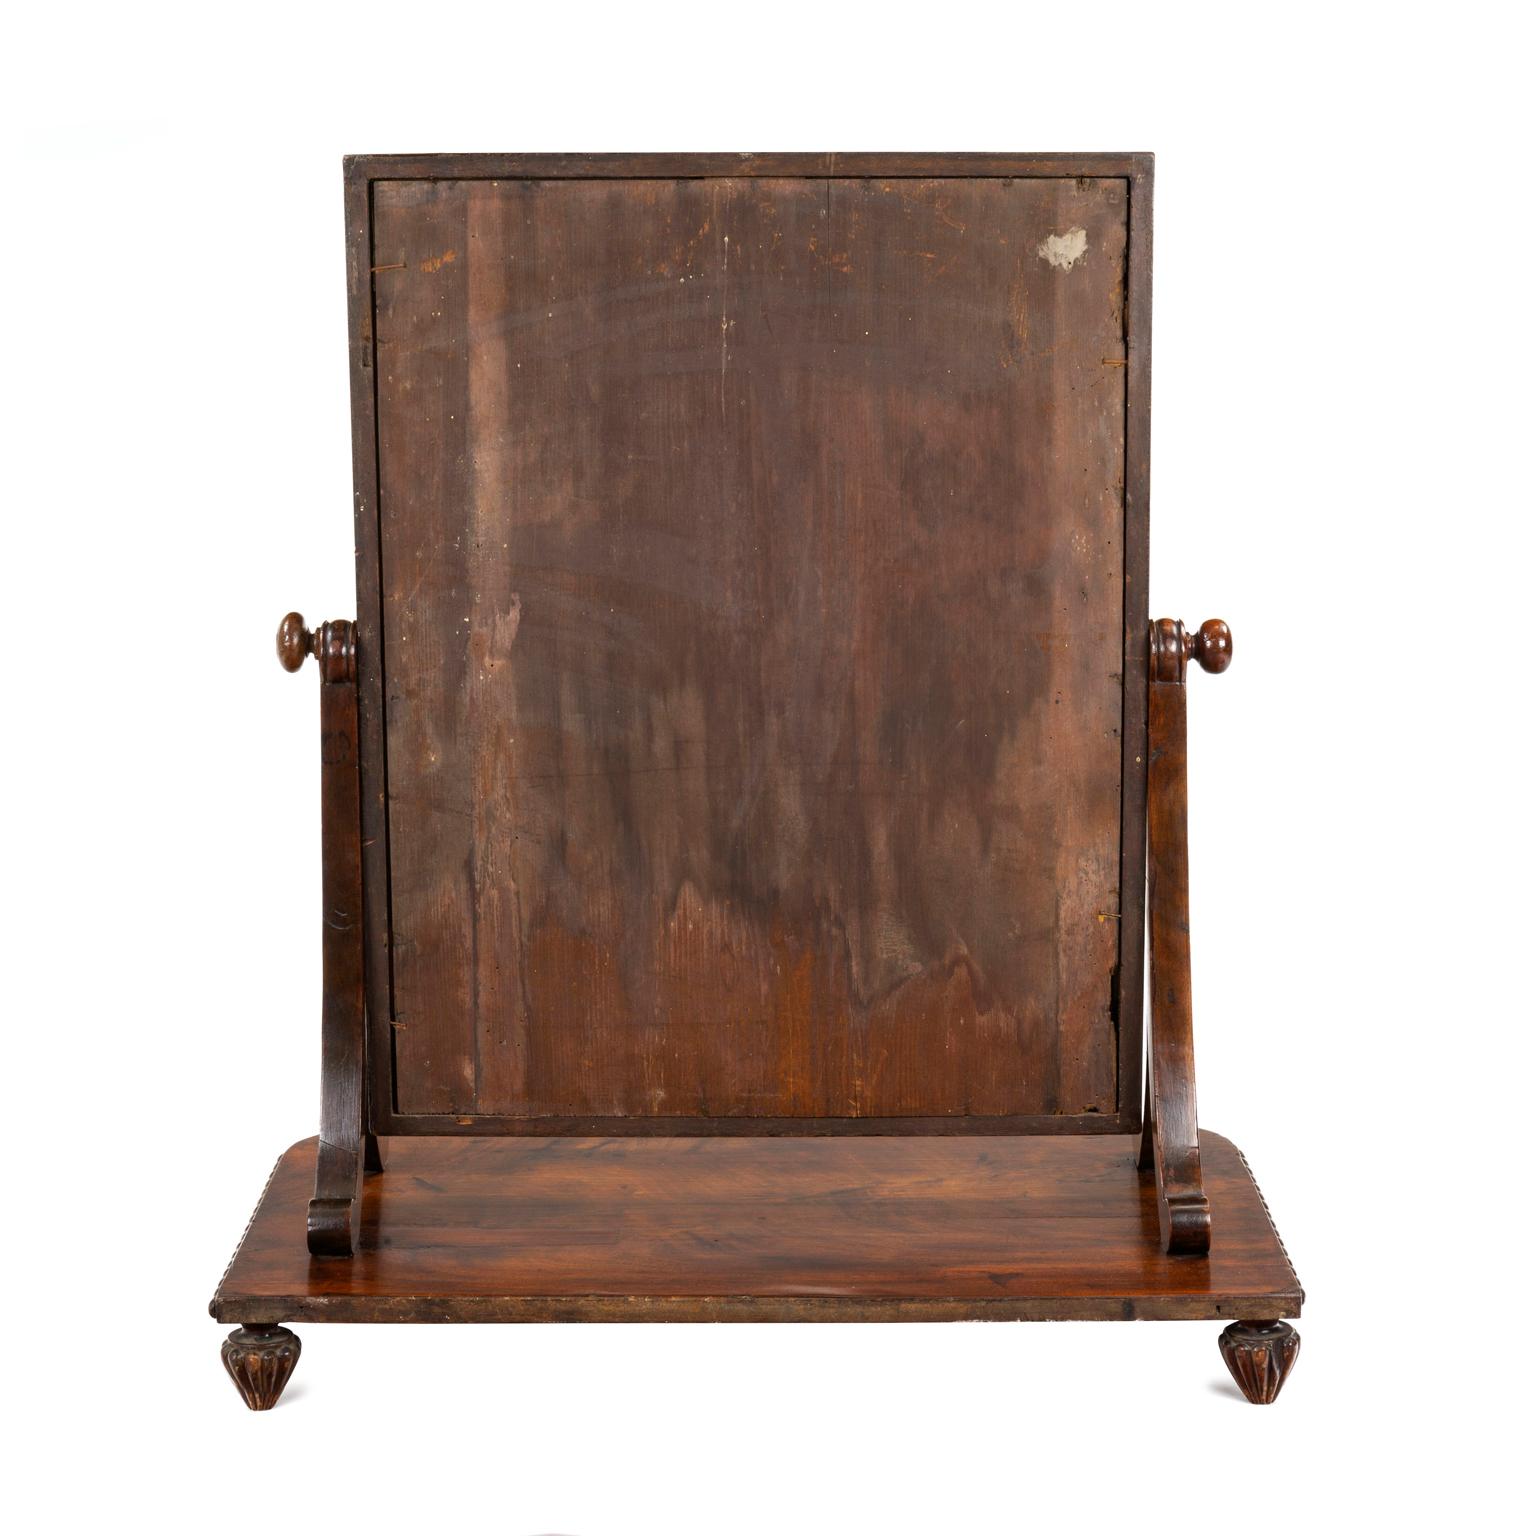 British Gillows Dressing Mirror from the Regency Period